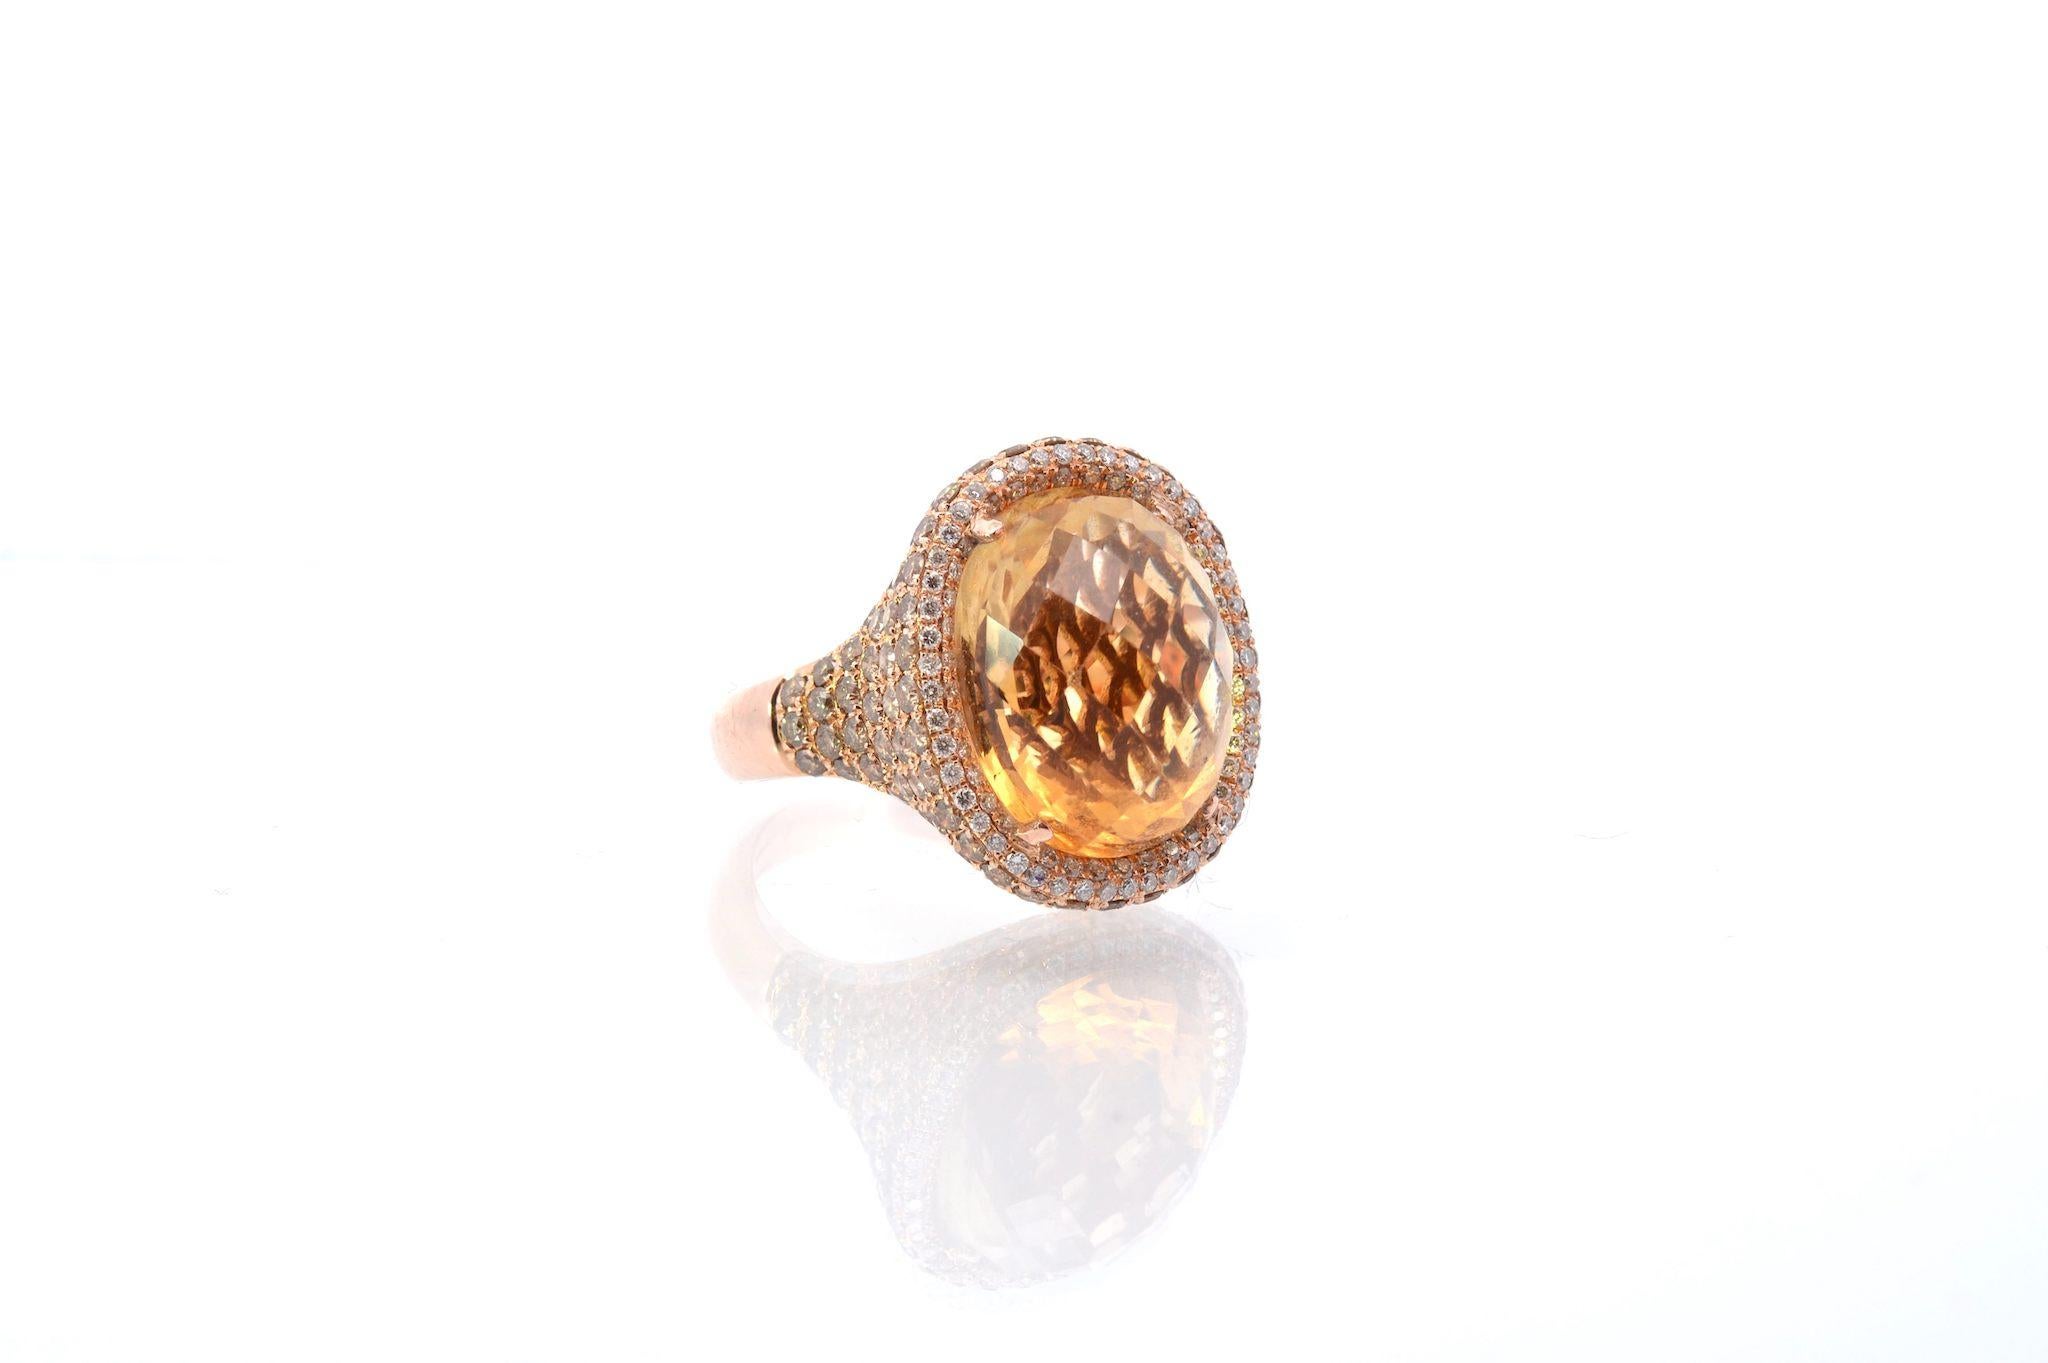 Cabochon Faceted citrine cabochon and brown diamond ring